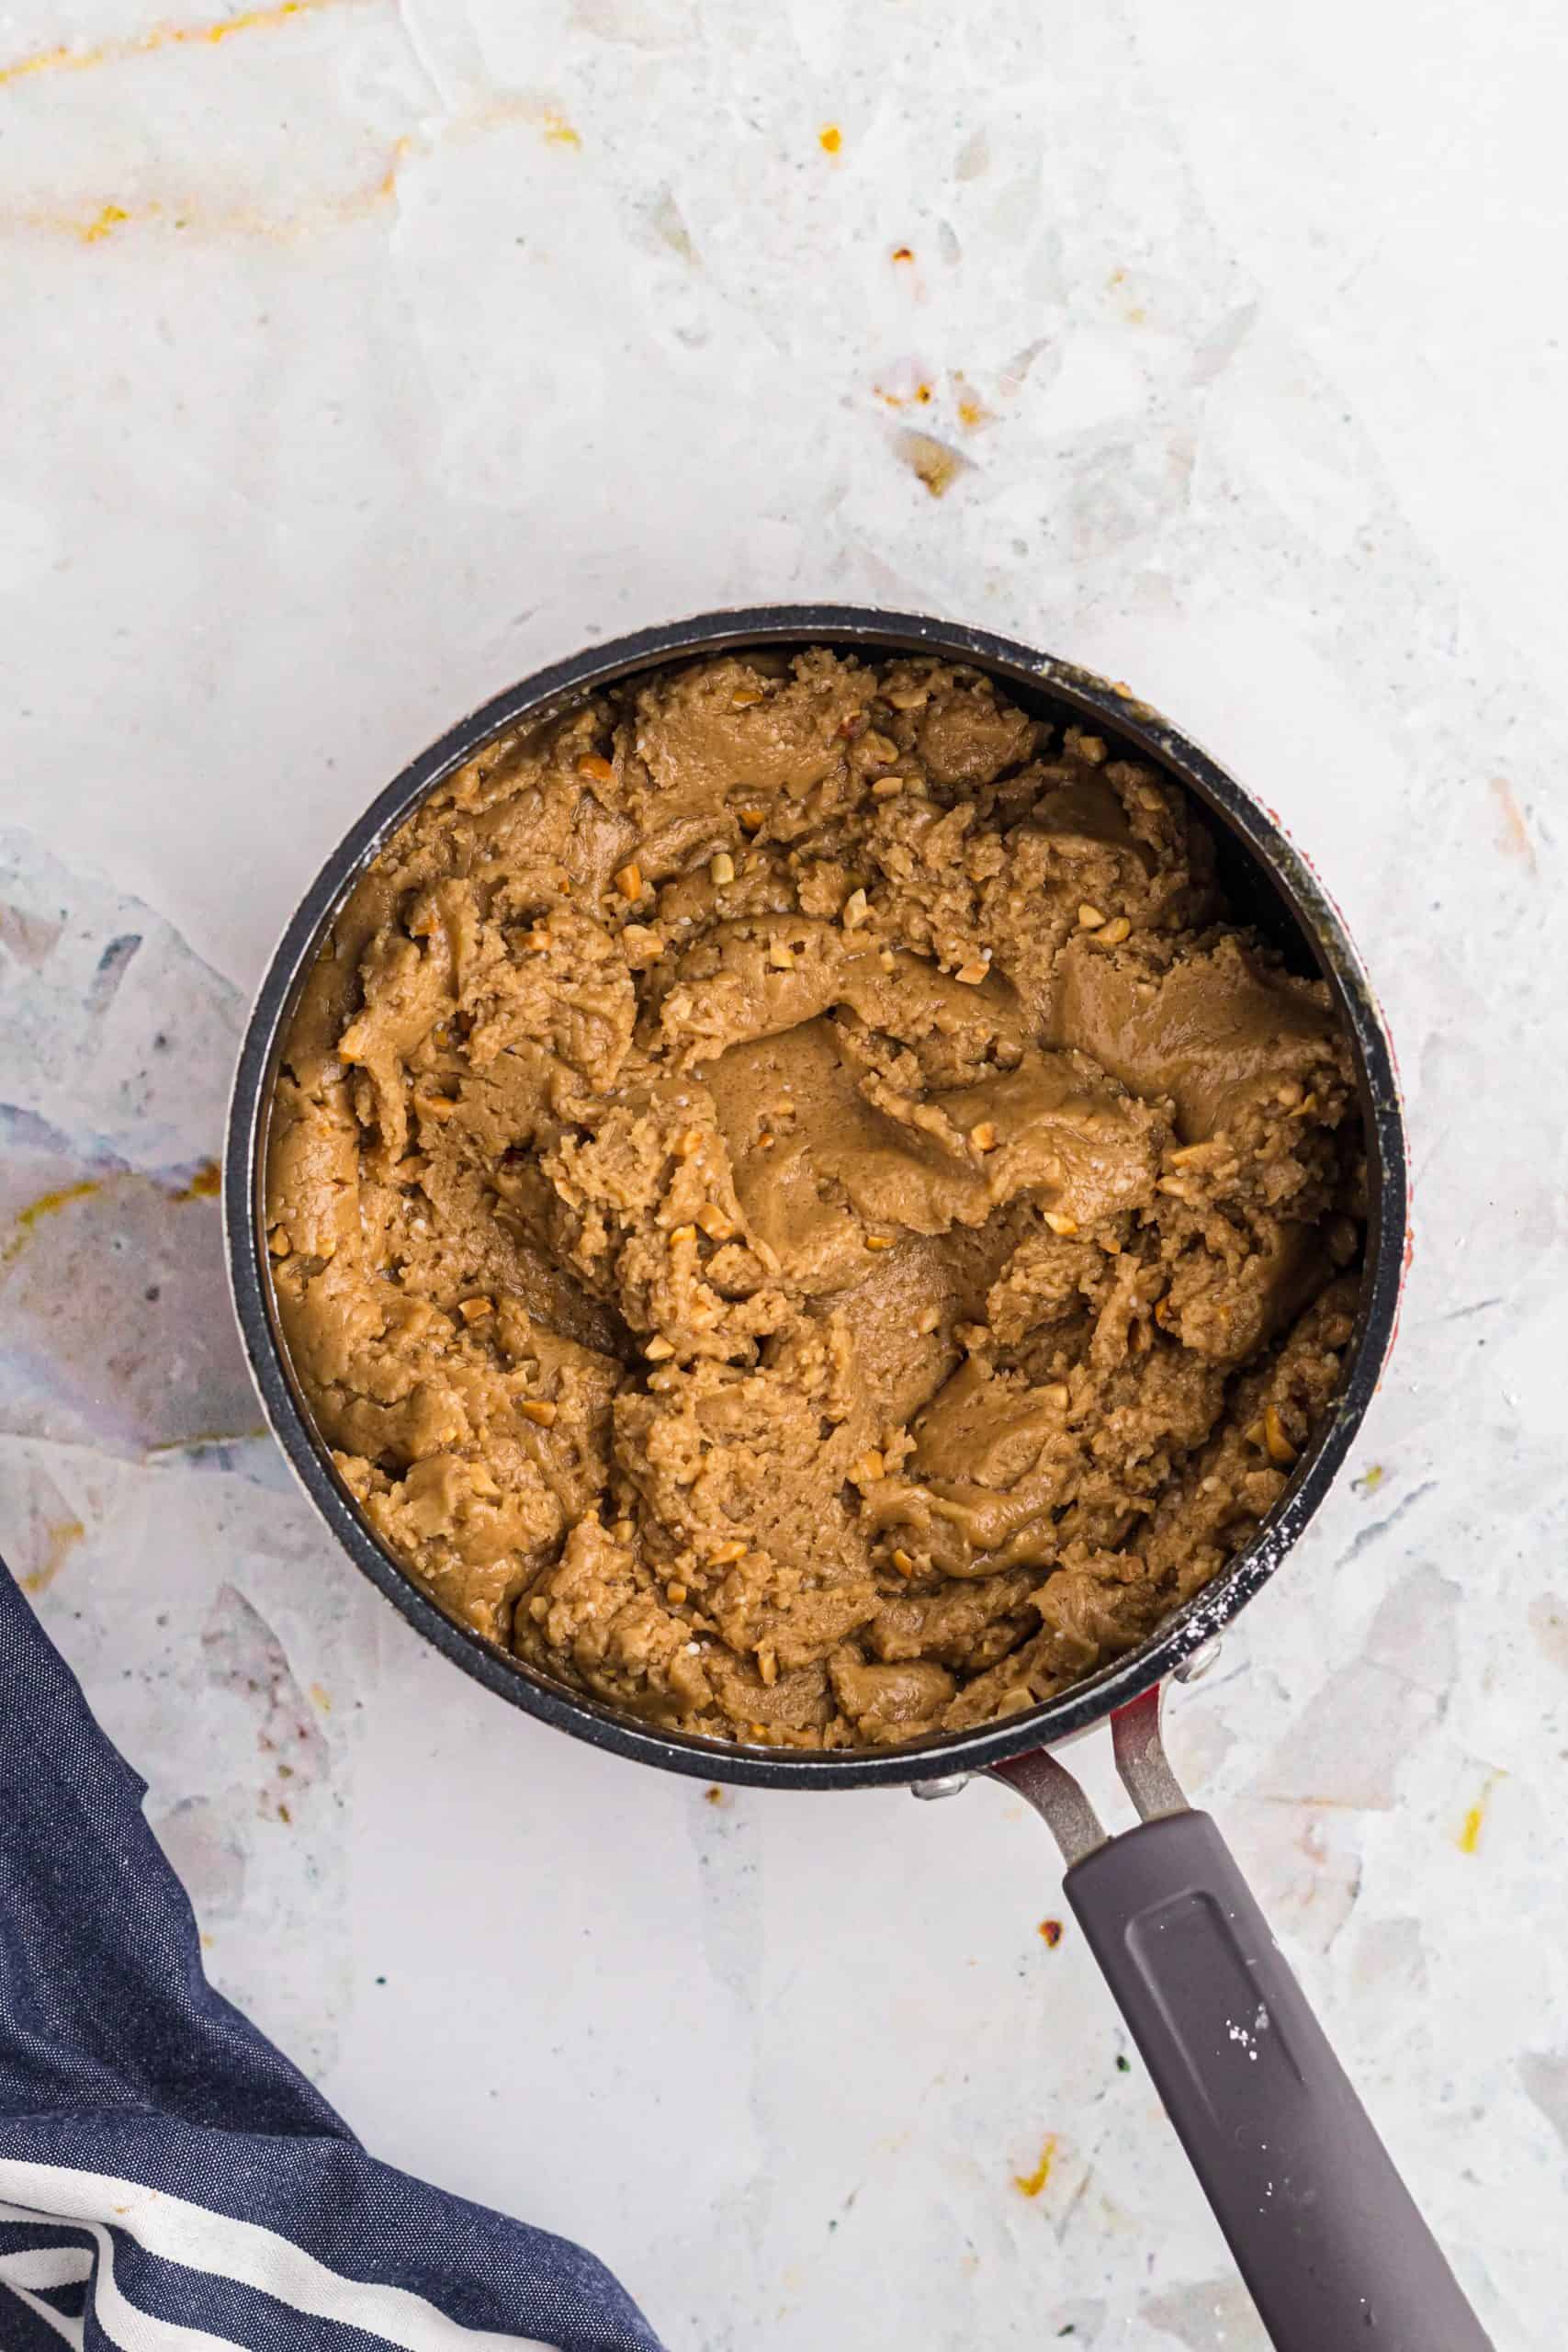 powdered sugar mixed into peanut butter mixture in a nonstick sauce pan.